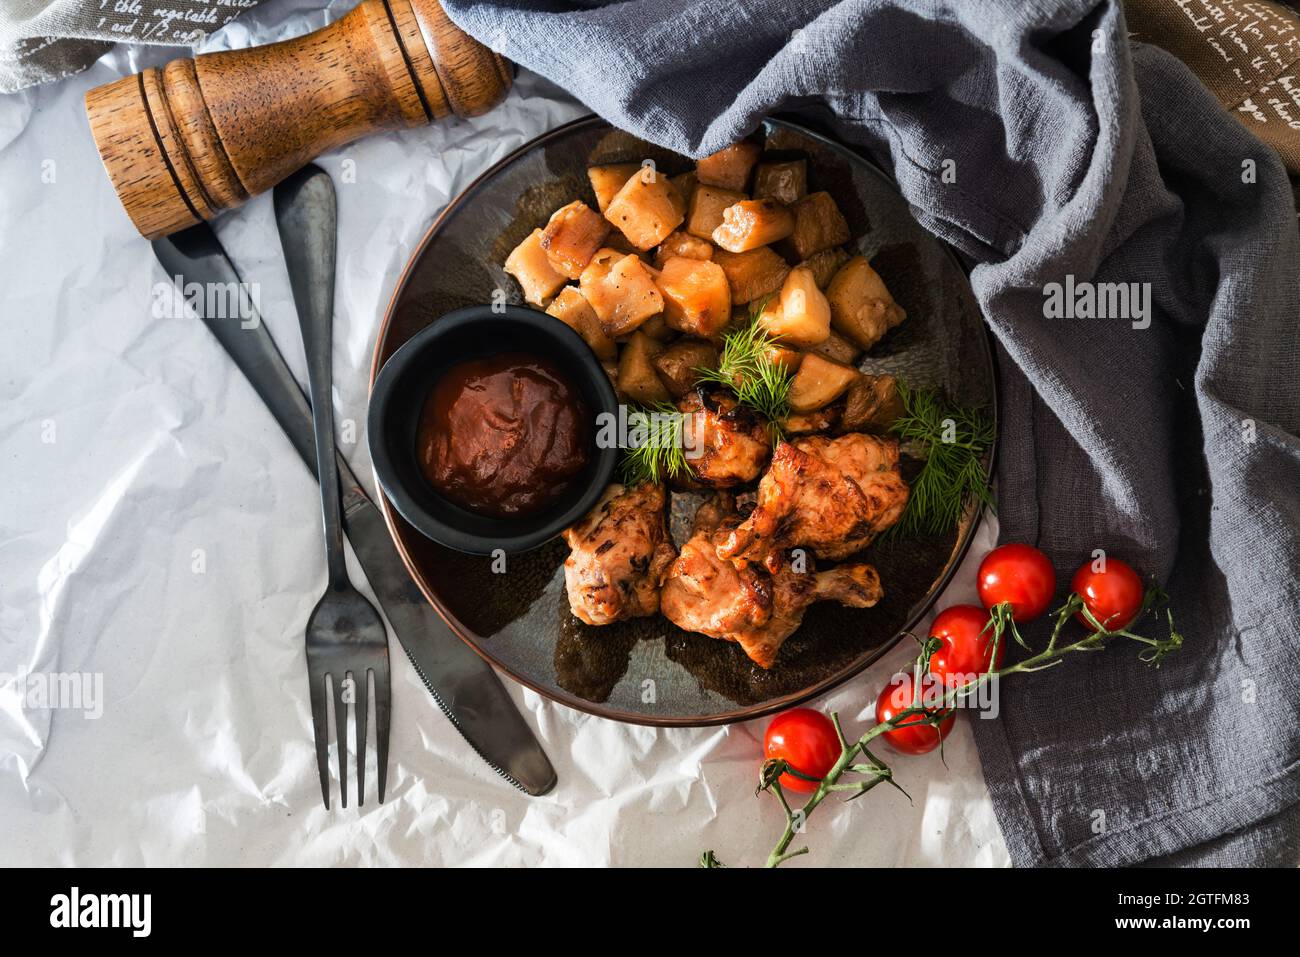 High Angle View Of Food In Plate Stock Photo